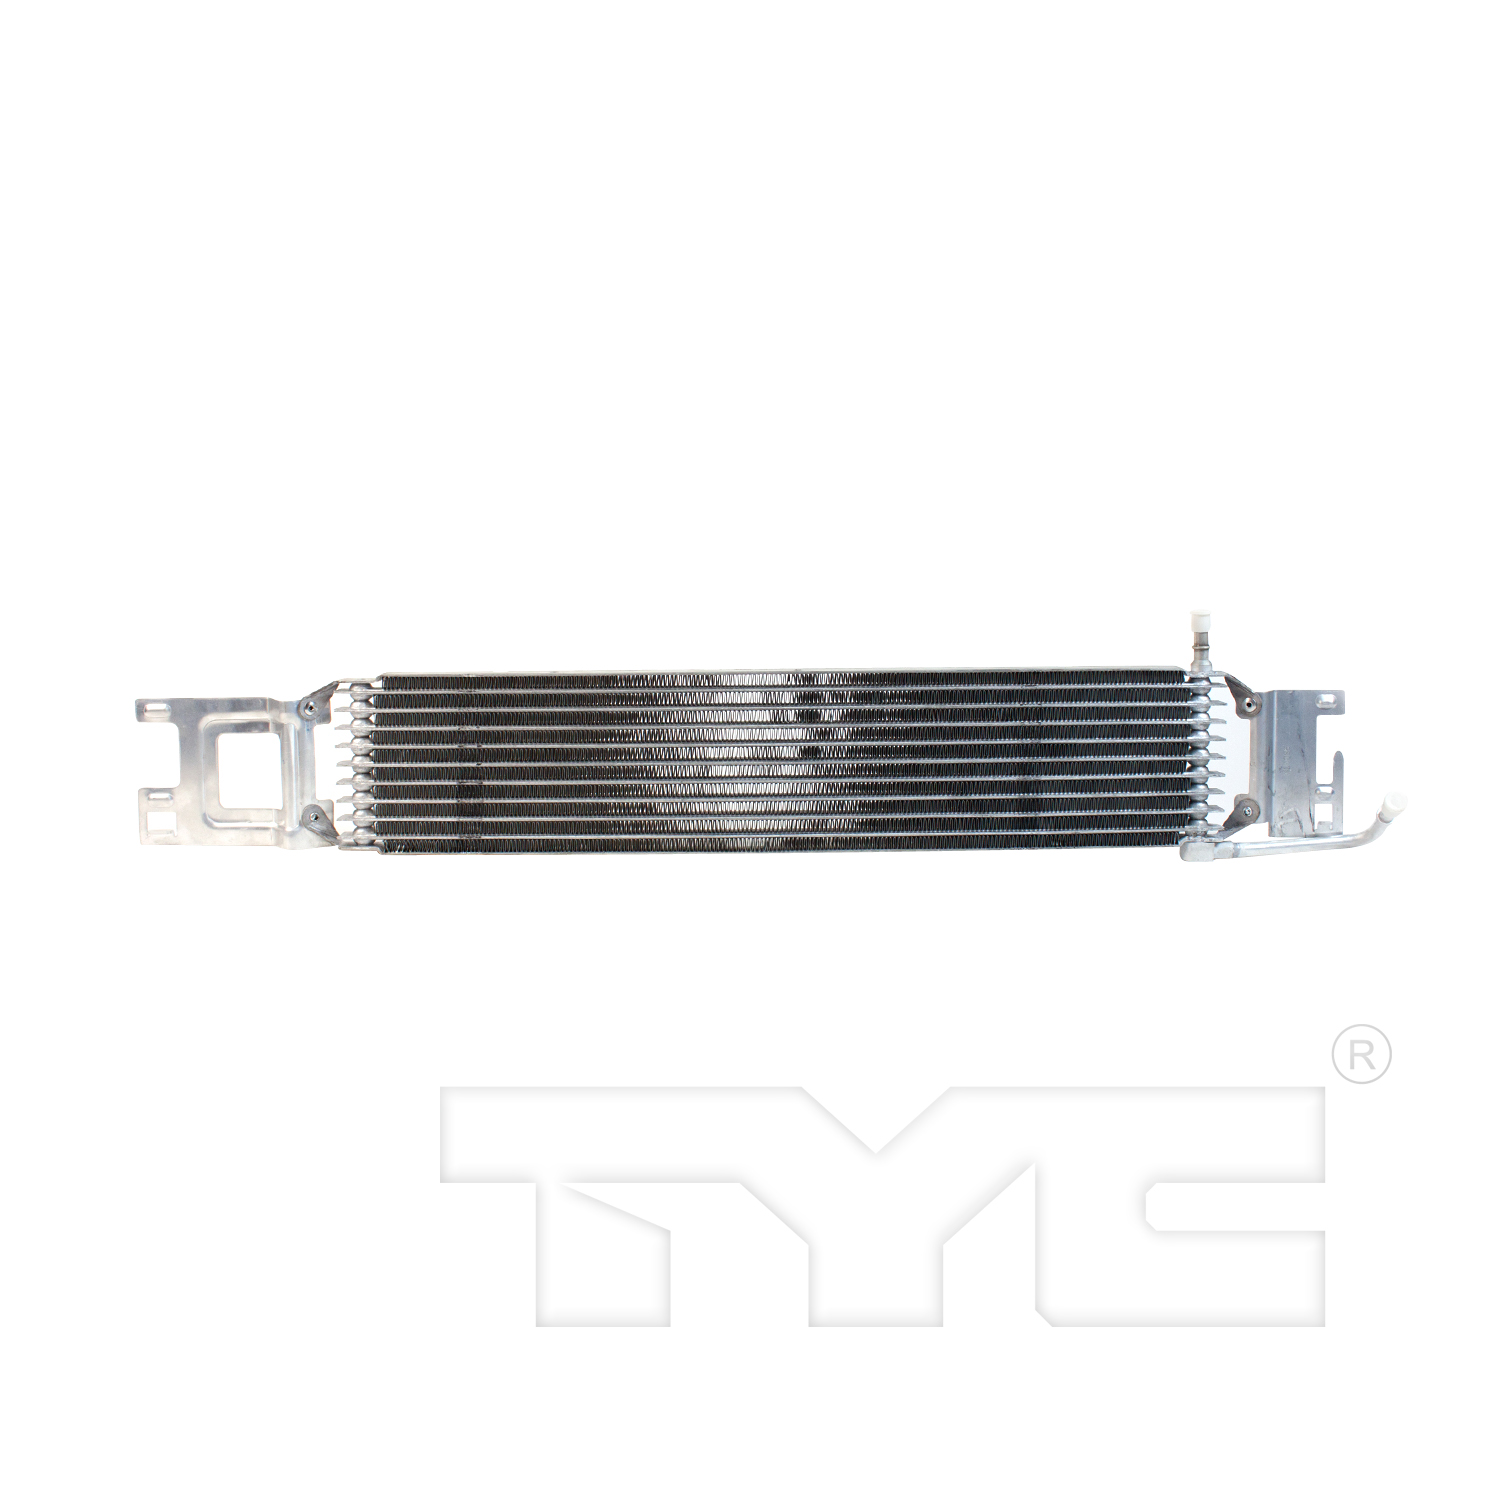 Aftermarket RADIATORS for FORD - TRANSIT CONNECT, TRANSIT CONNECT,10-13,Transmission cooler assembly